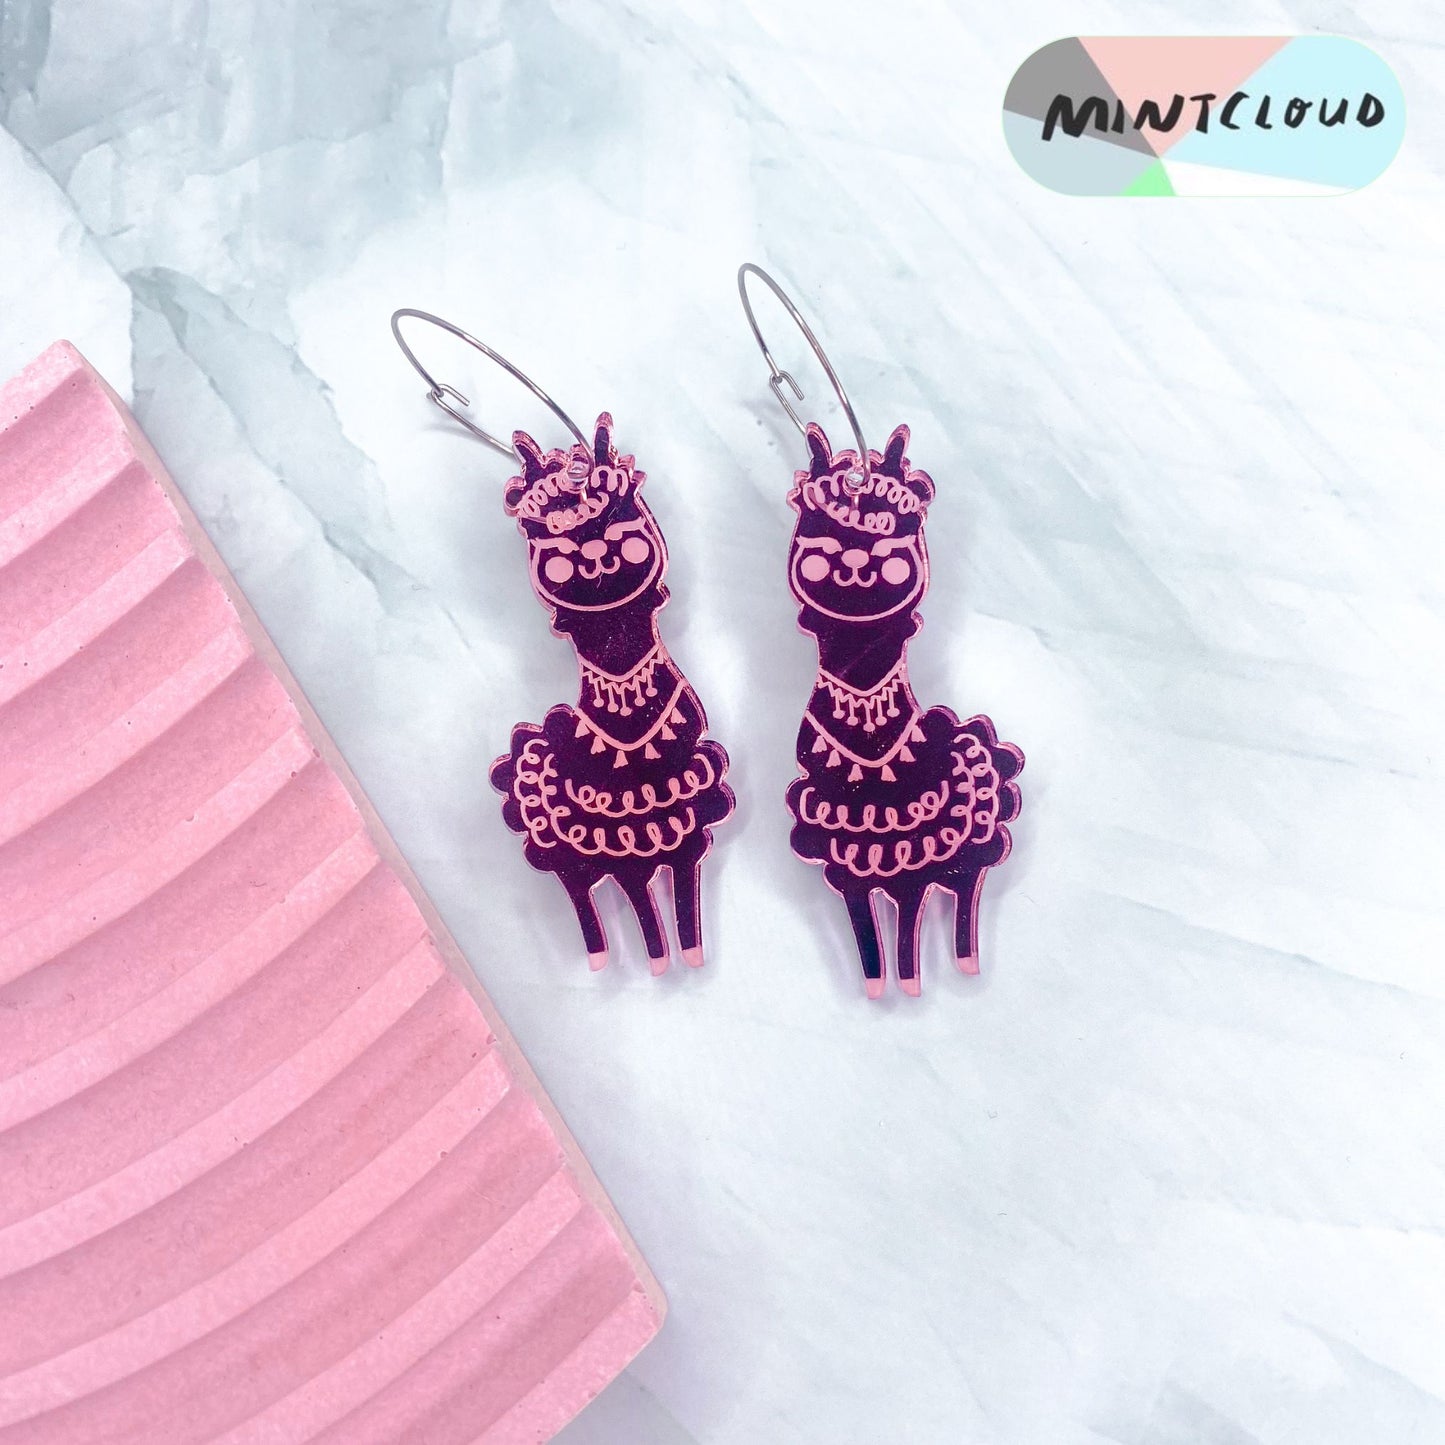 Festive Alpaca Mirror Dangles - Various Colours From Mintcloud Studio, an online jewellery store based in Adelaide South Australia